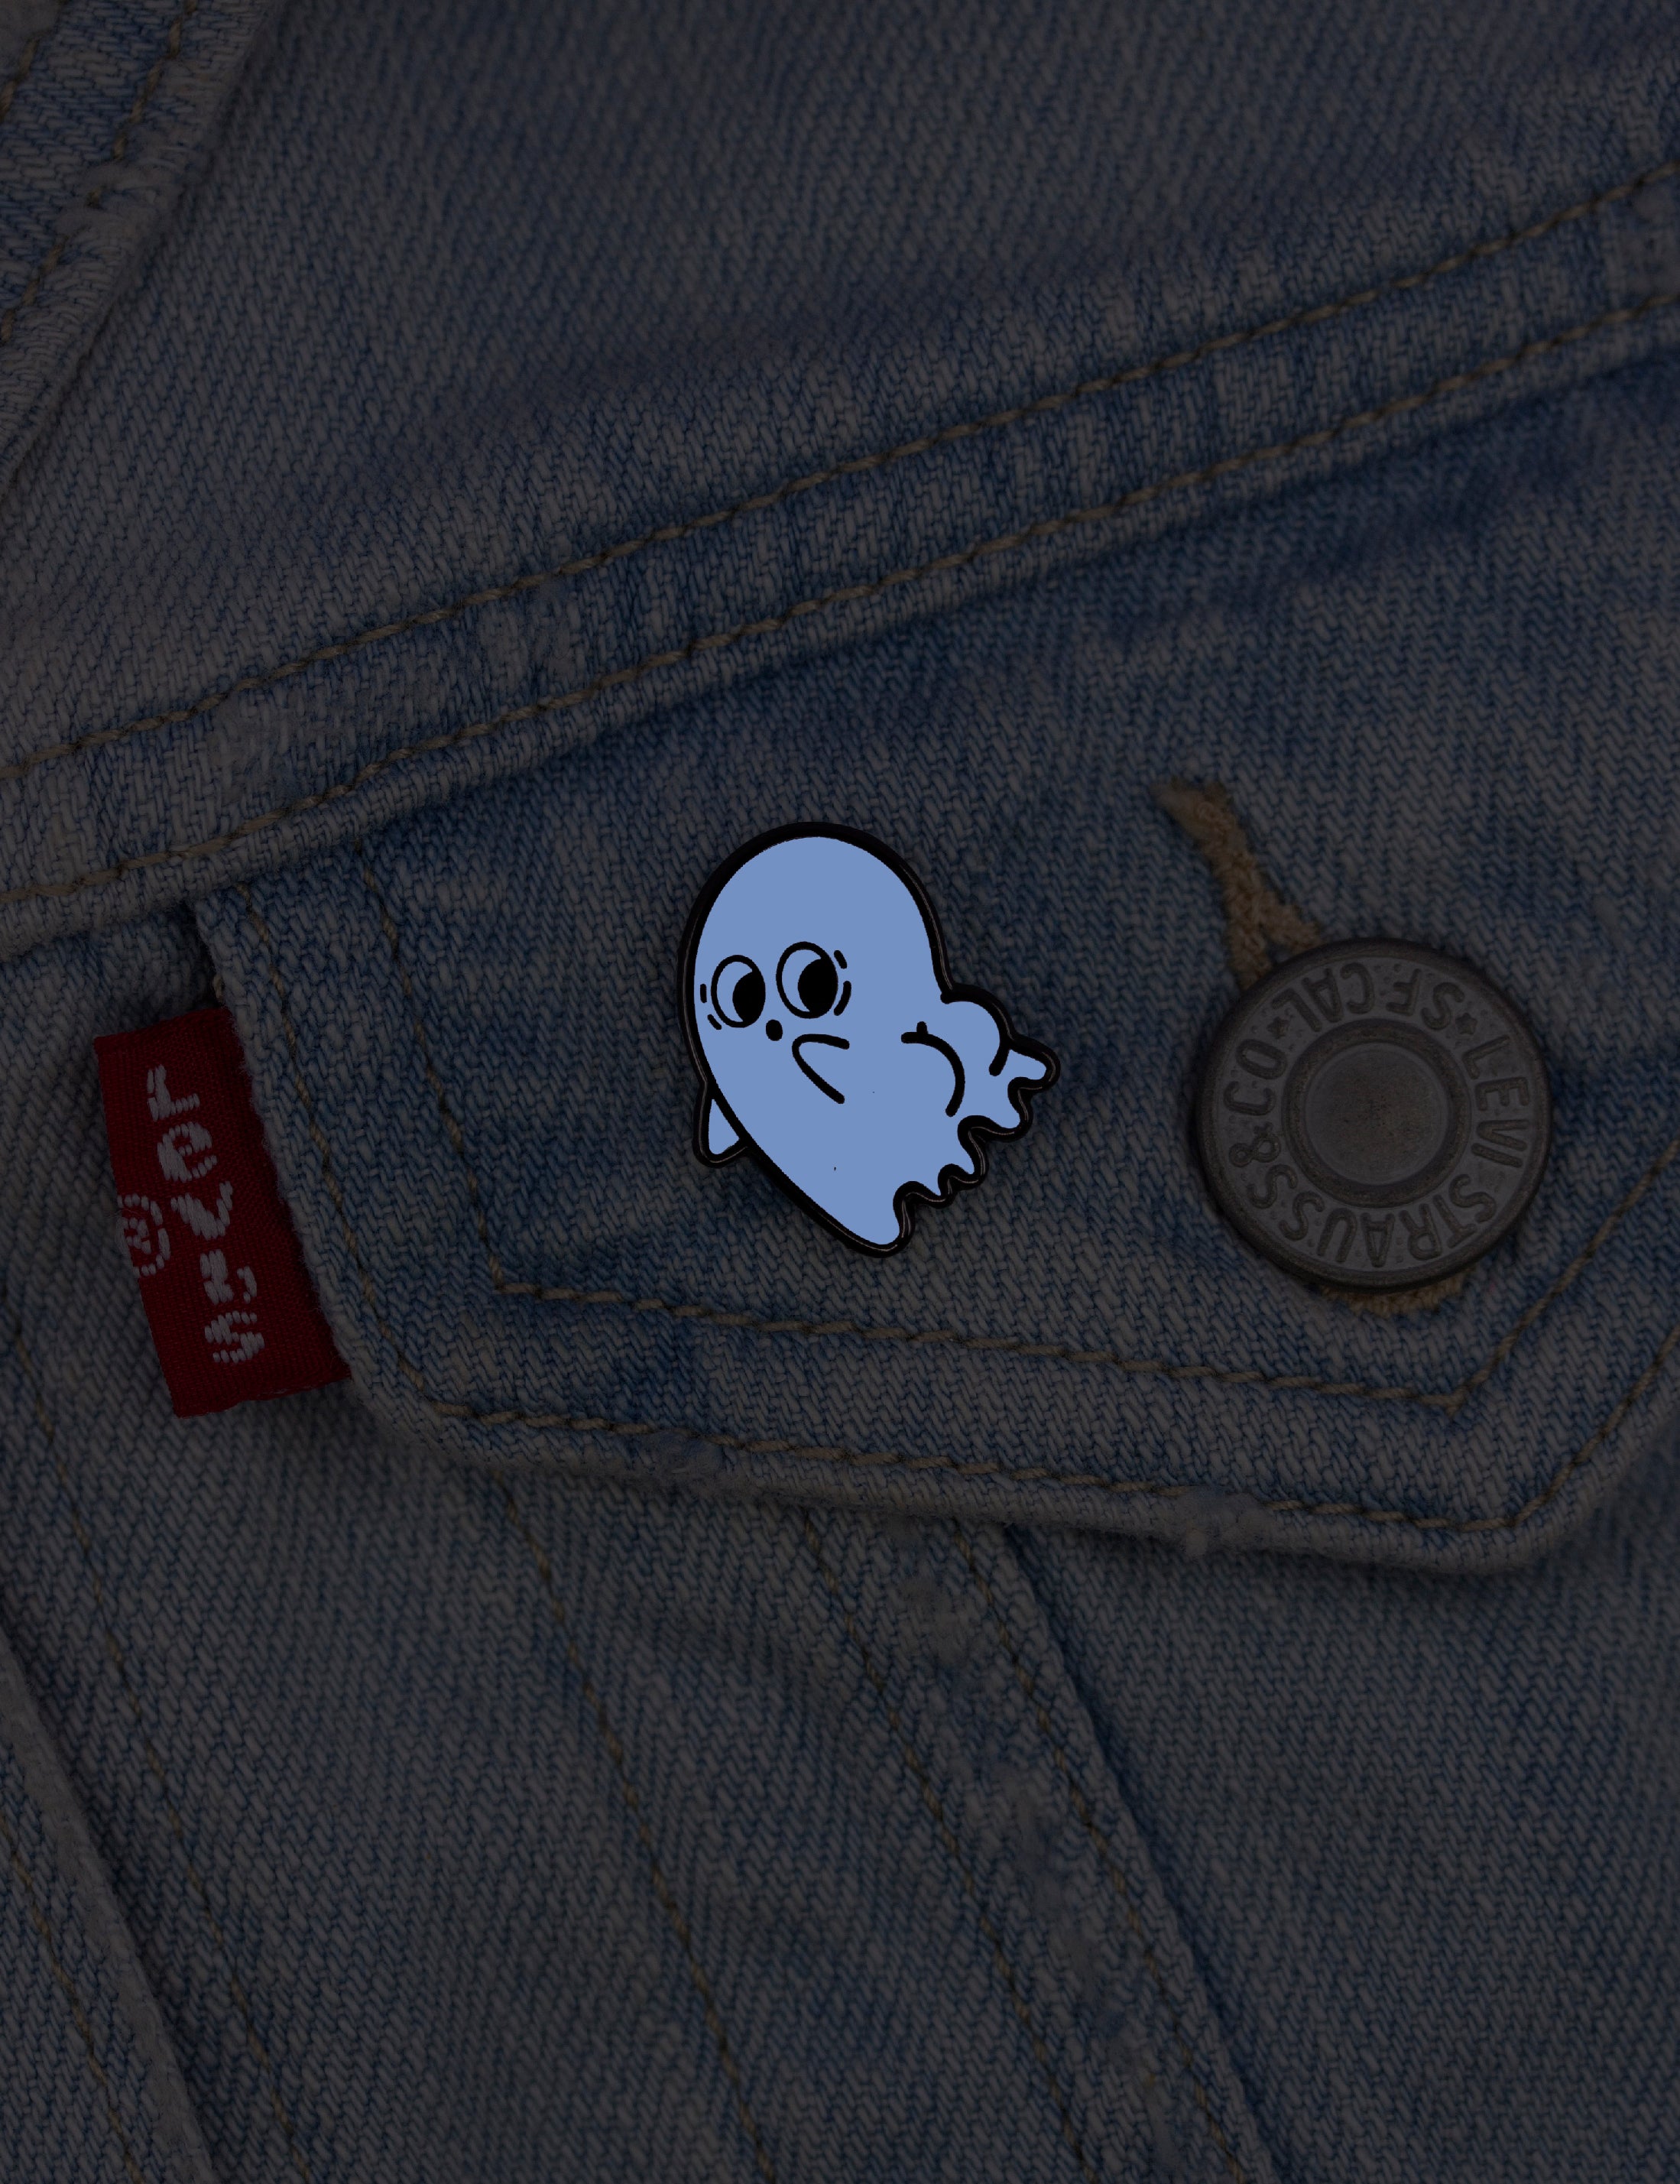 b0oO-ty GHOST PIN - Now glow in the dark !